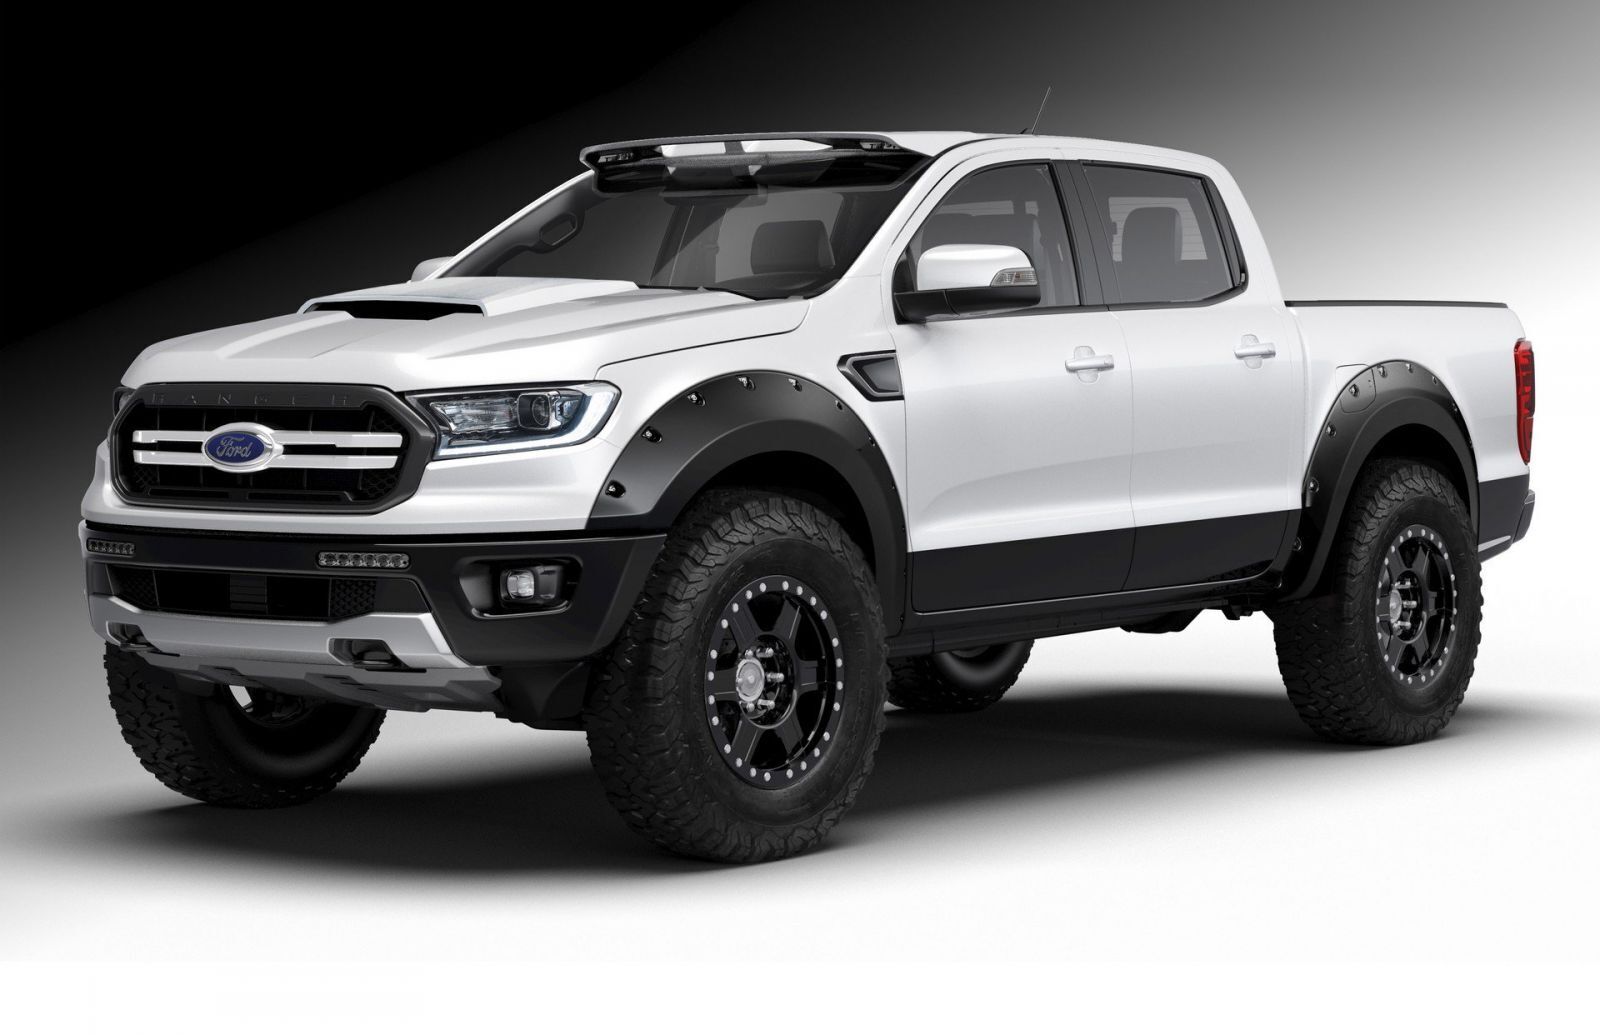 https://www.carscoops.com/2018/10/2019-ford-ranger-lands-sema-ahead-next-years-launch/